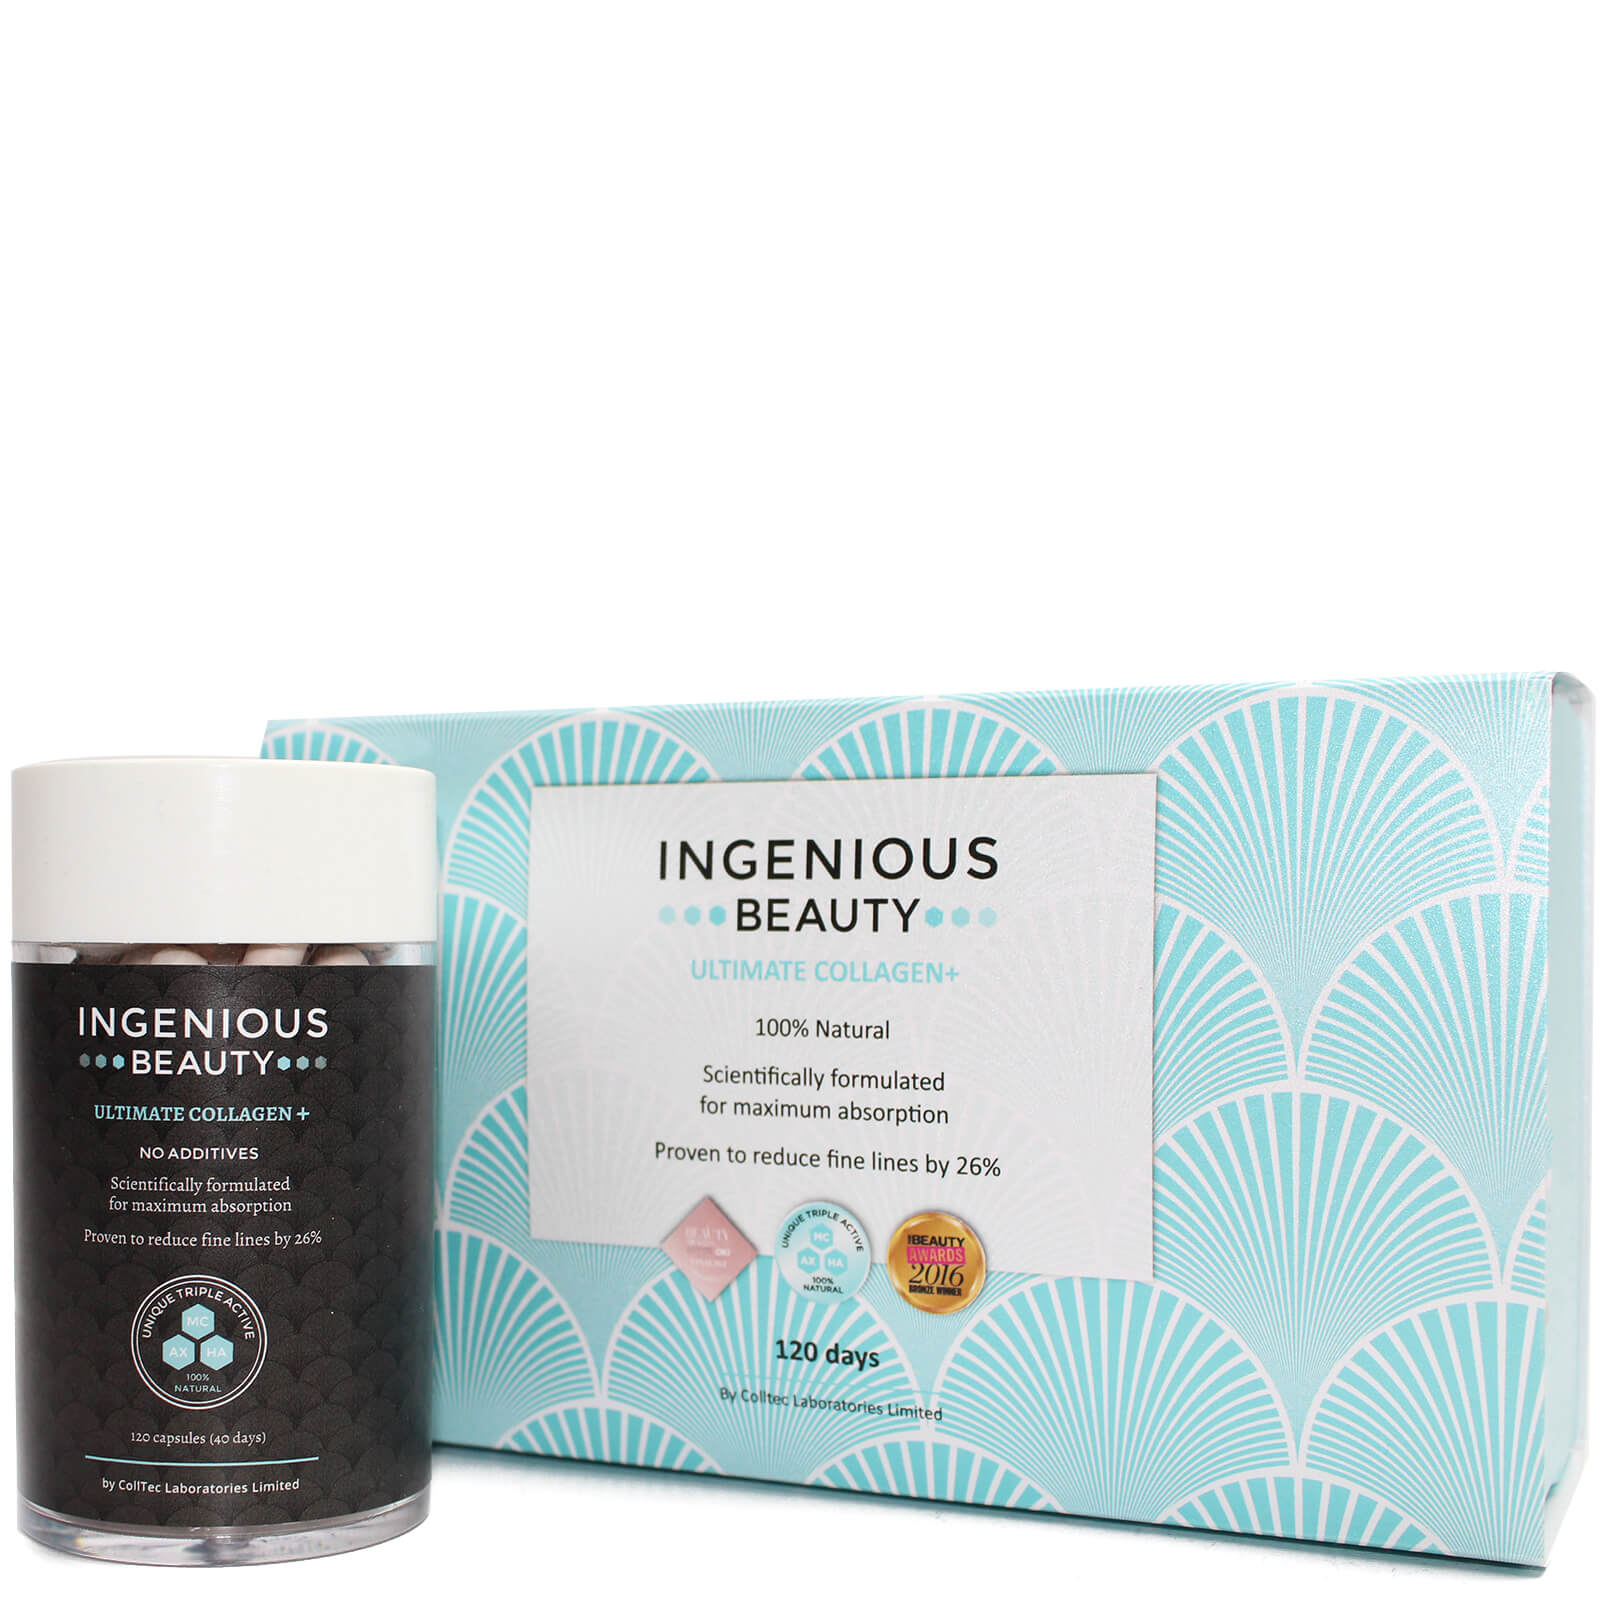 Ingenious Beauty Ultimate Collagen+ Box of 3 Limited Edition